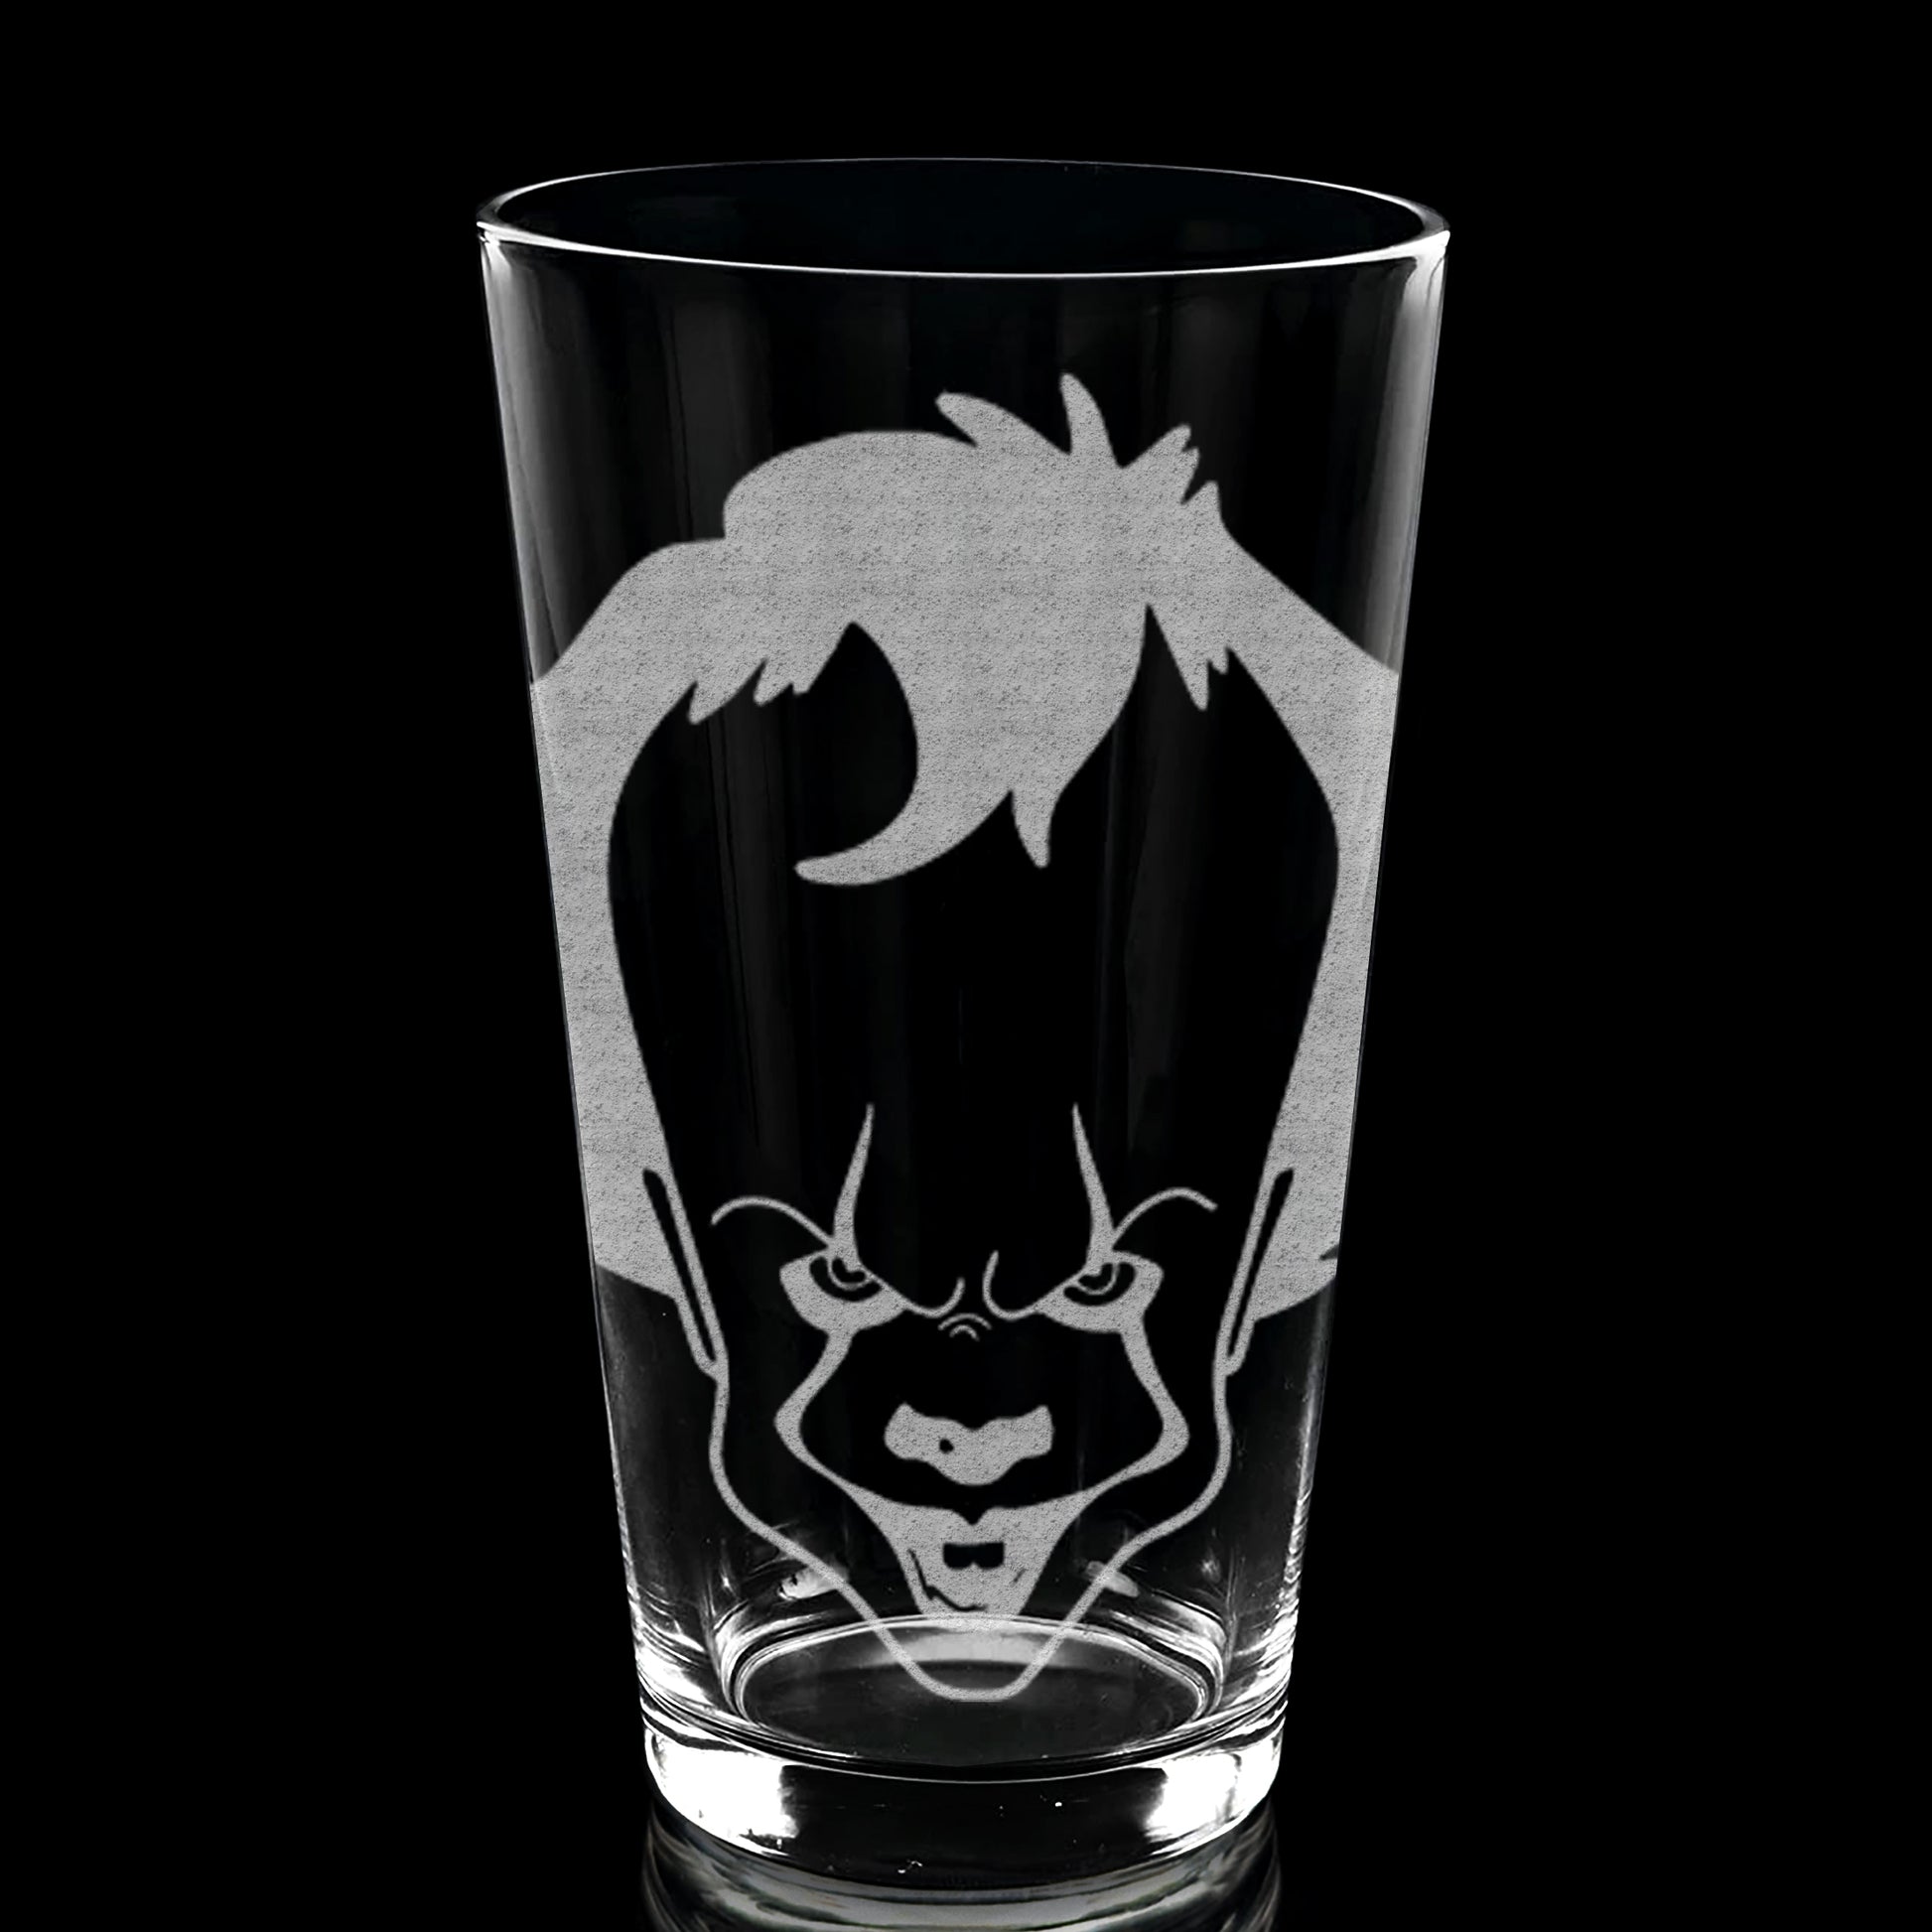 Guinness Beer Glass With Halloween Bats Don't Be Afraid of the Dark  Collectible 20 Oz Pint Glass 